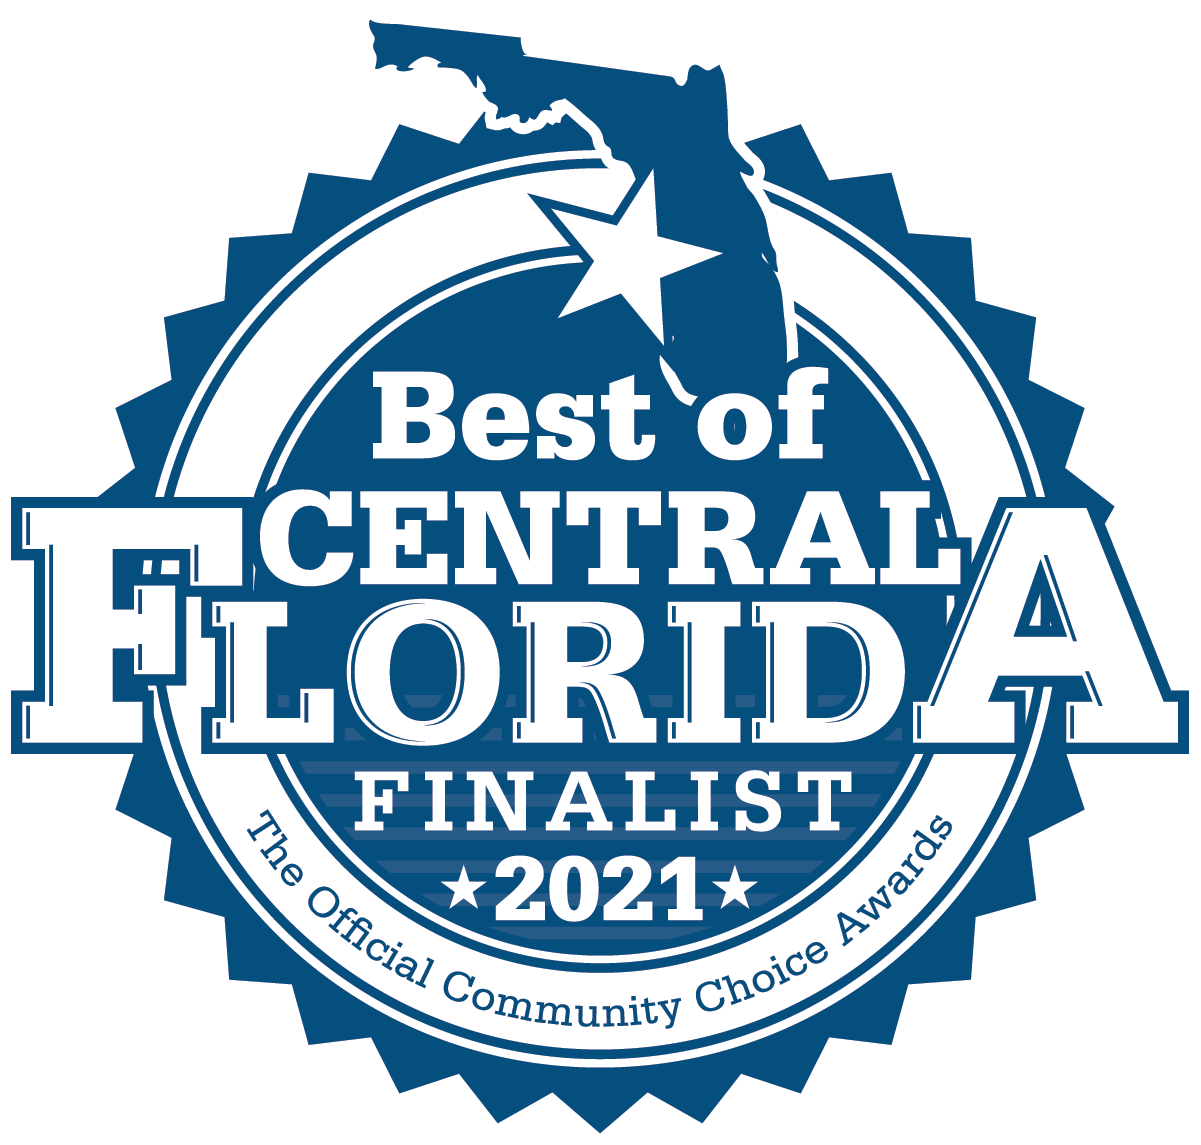 Advanced Spinal Care was a finalist in the 2021 Best of Central Florida for Massage, Medspa, and Chiropractic